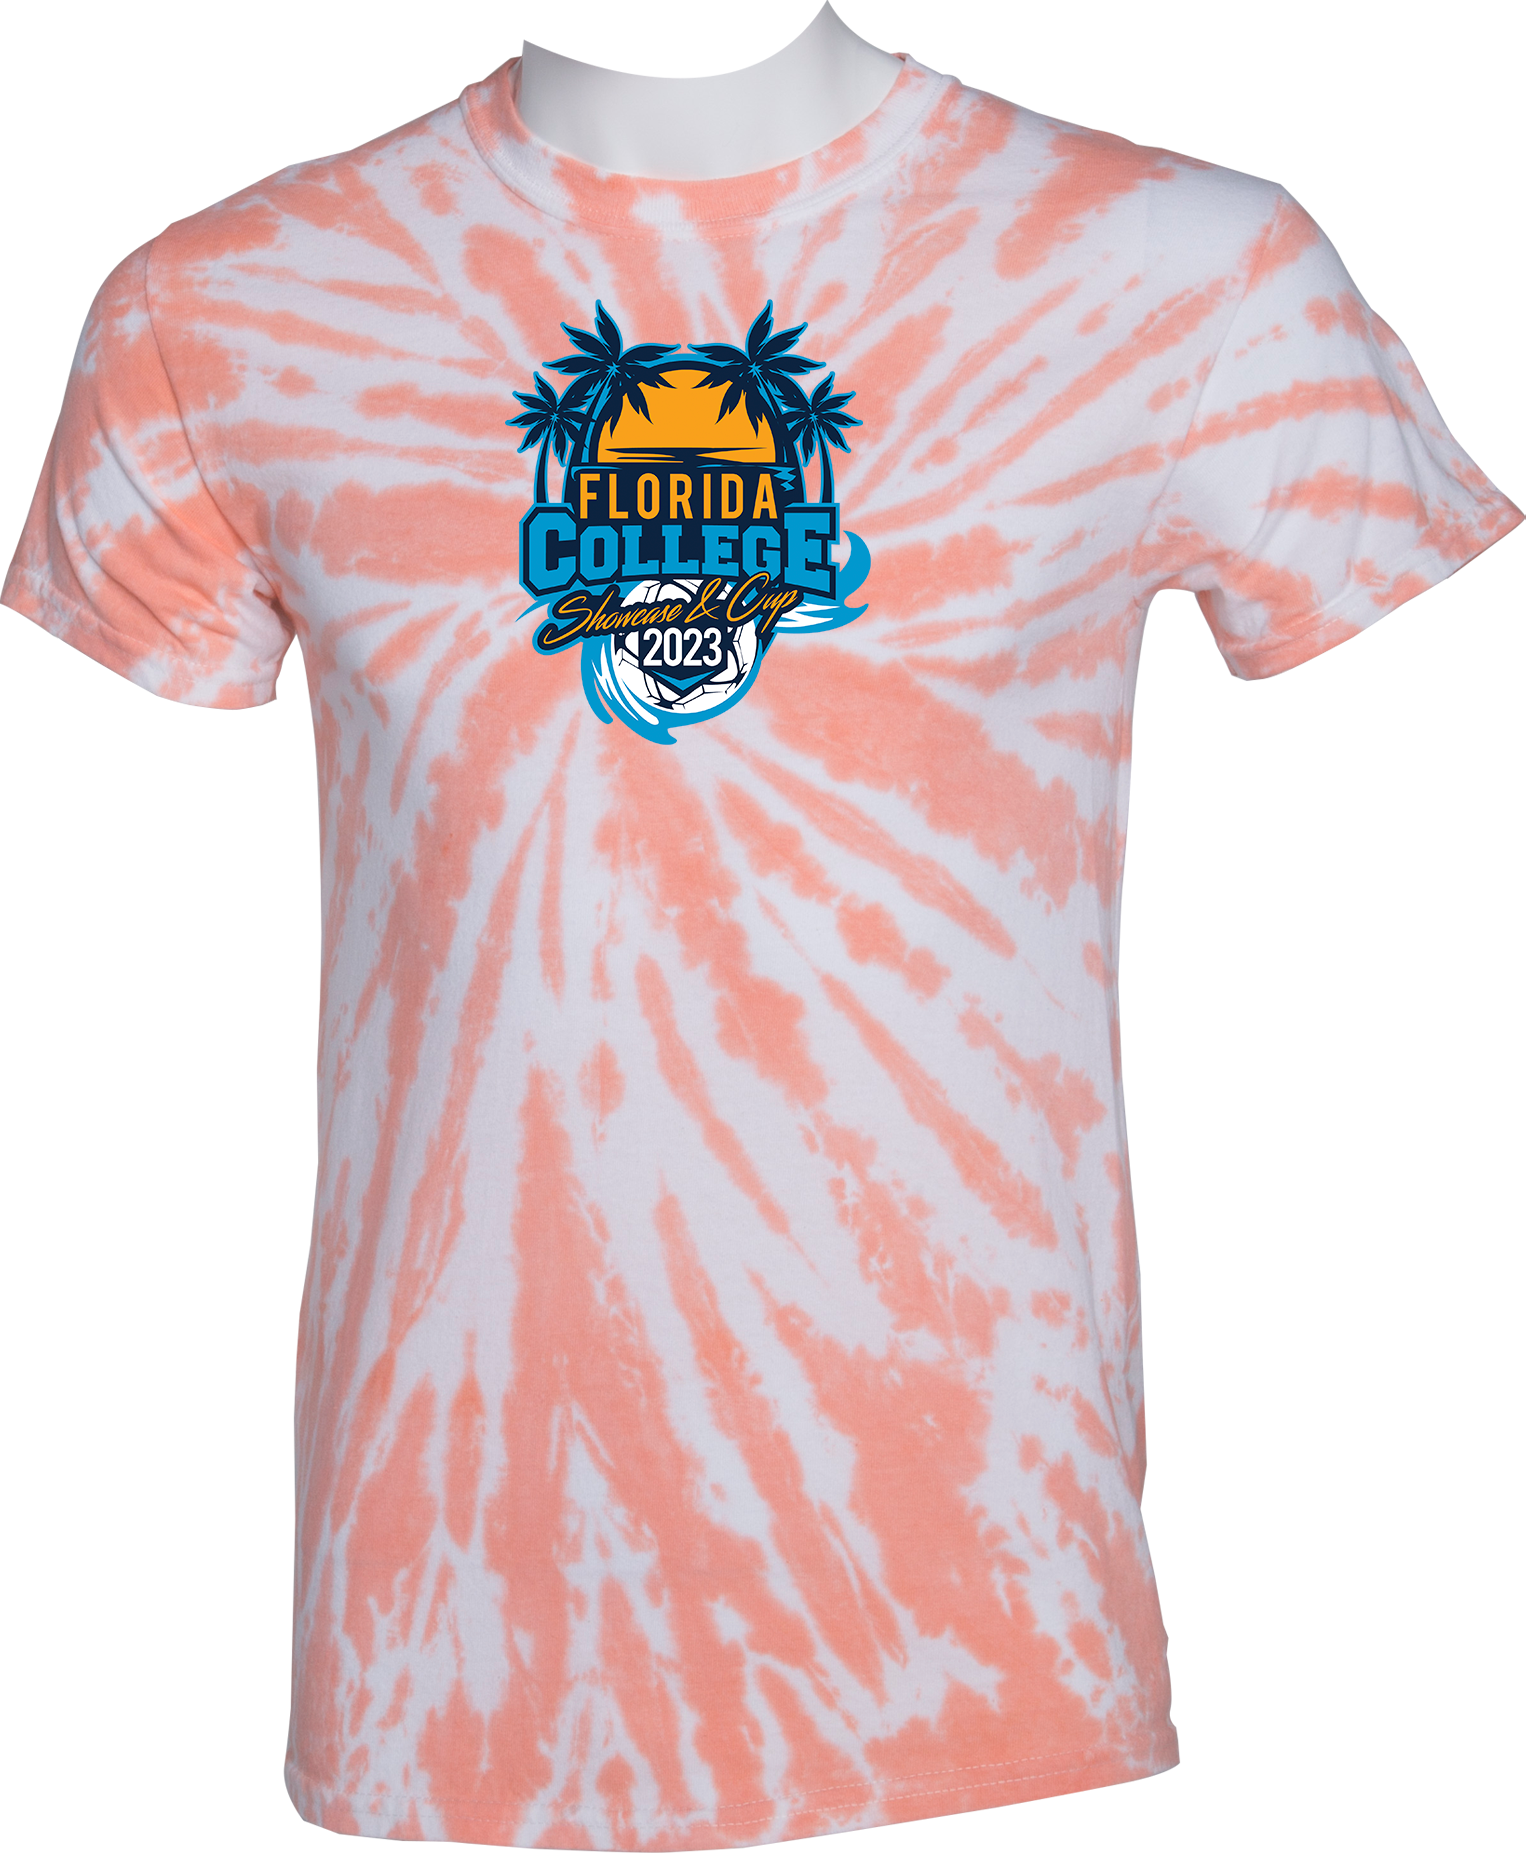 TIE-DYE SHORT SLEEVES - 2023 Florida College Showcase and Cup